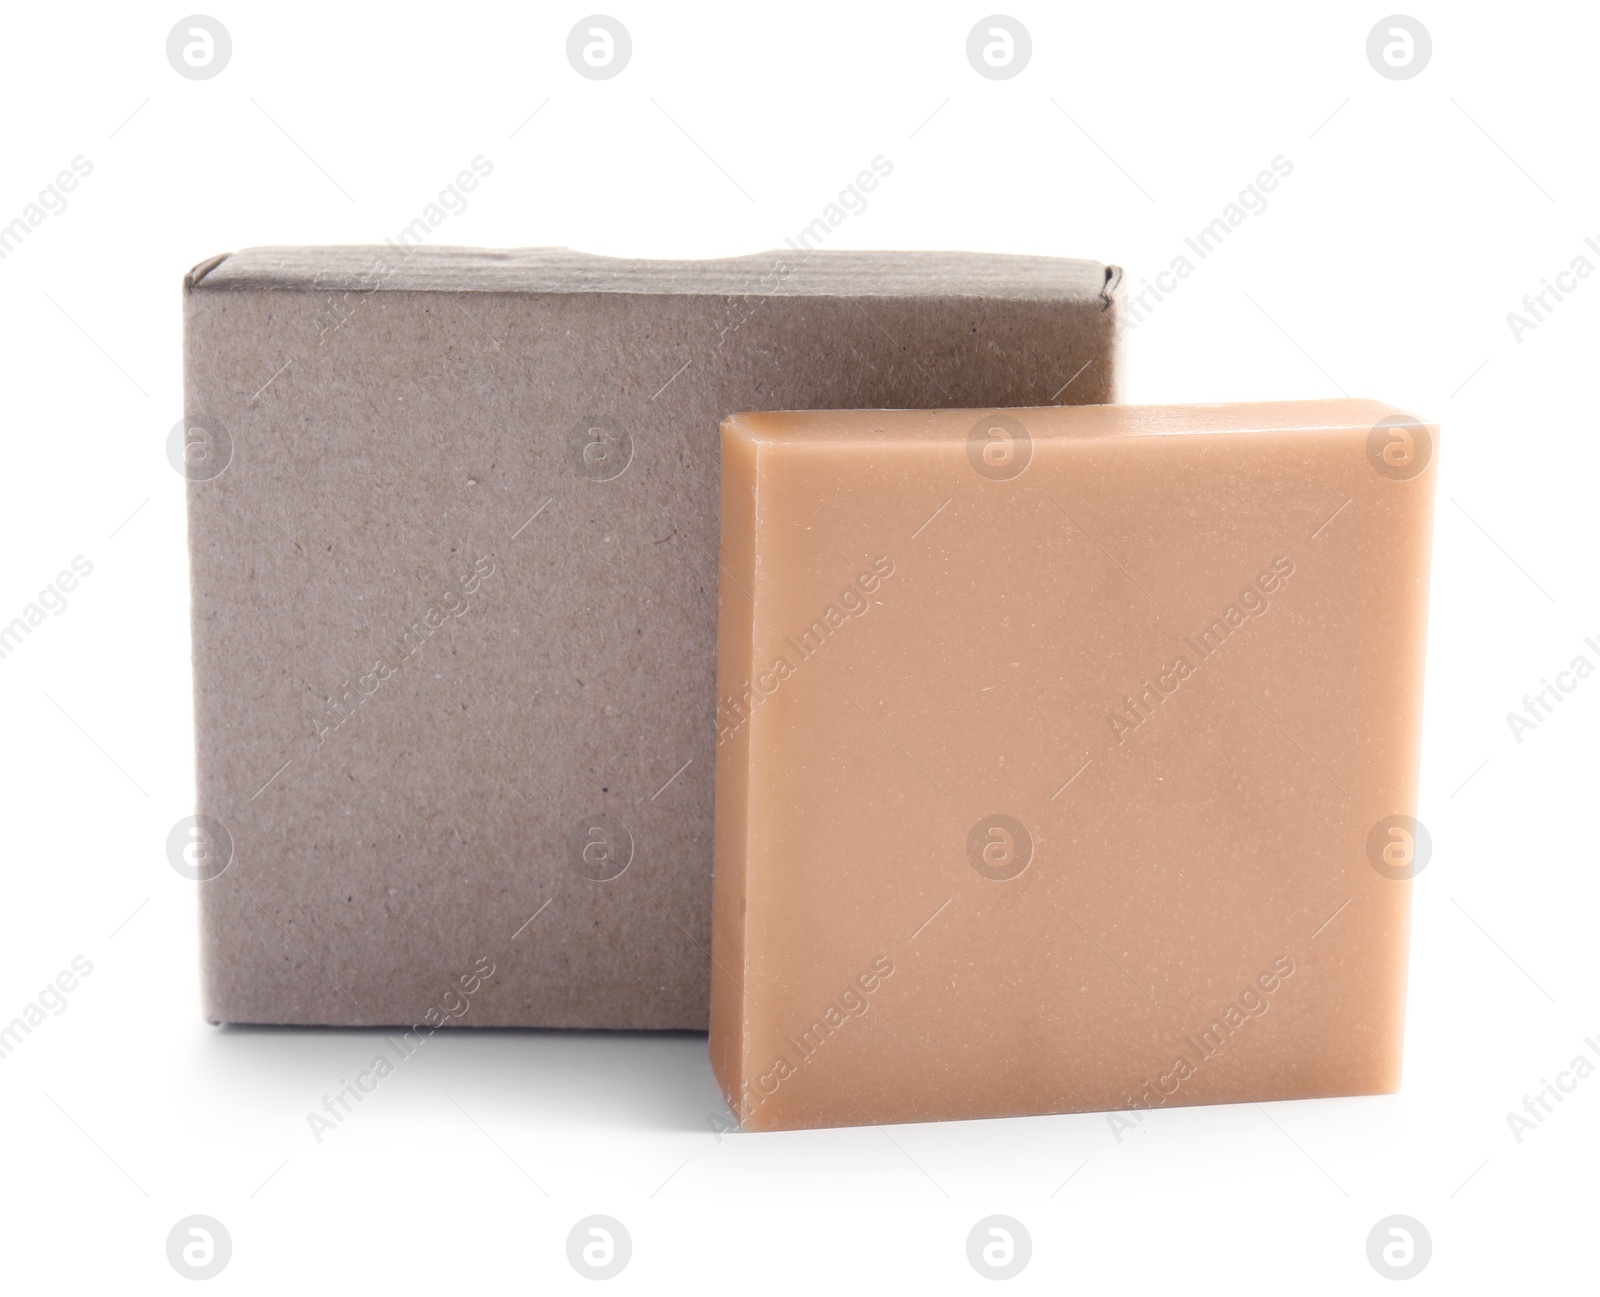 Photo of Hand made soap bar and cardboard package on white background